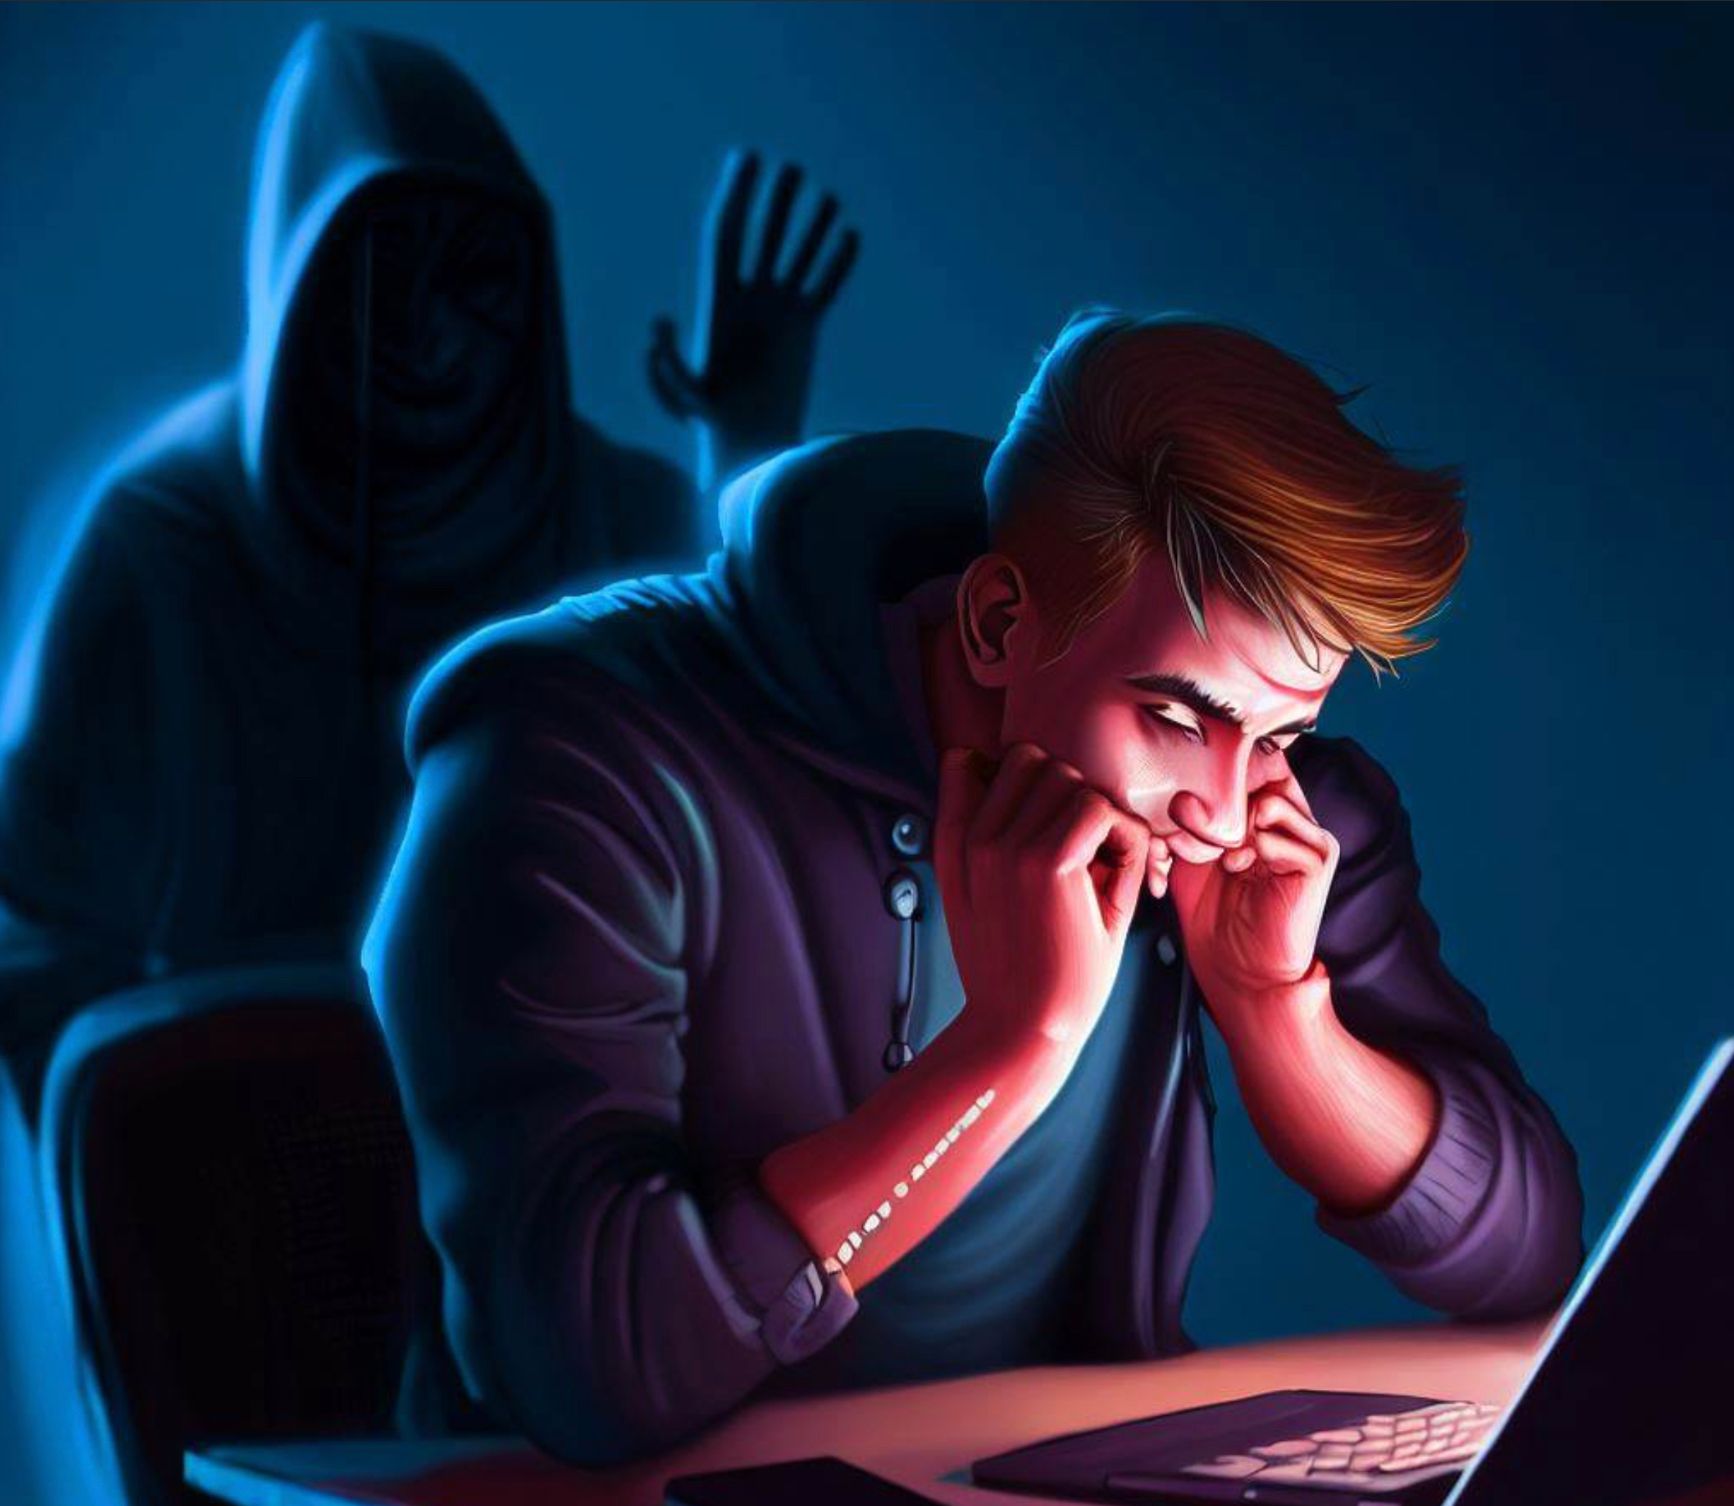 A cybercriminal lurking behind a person staring at a computer